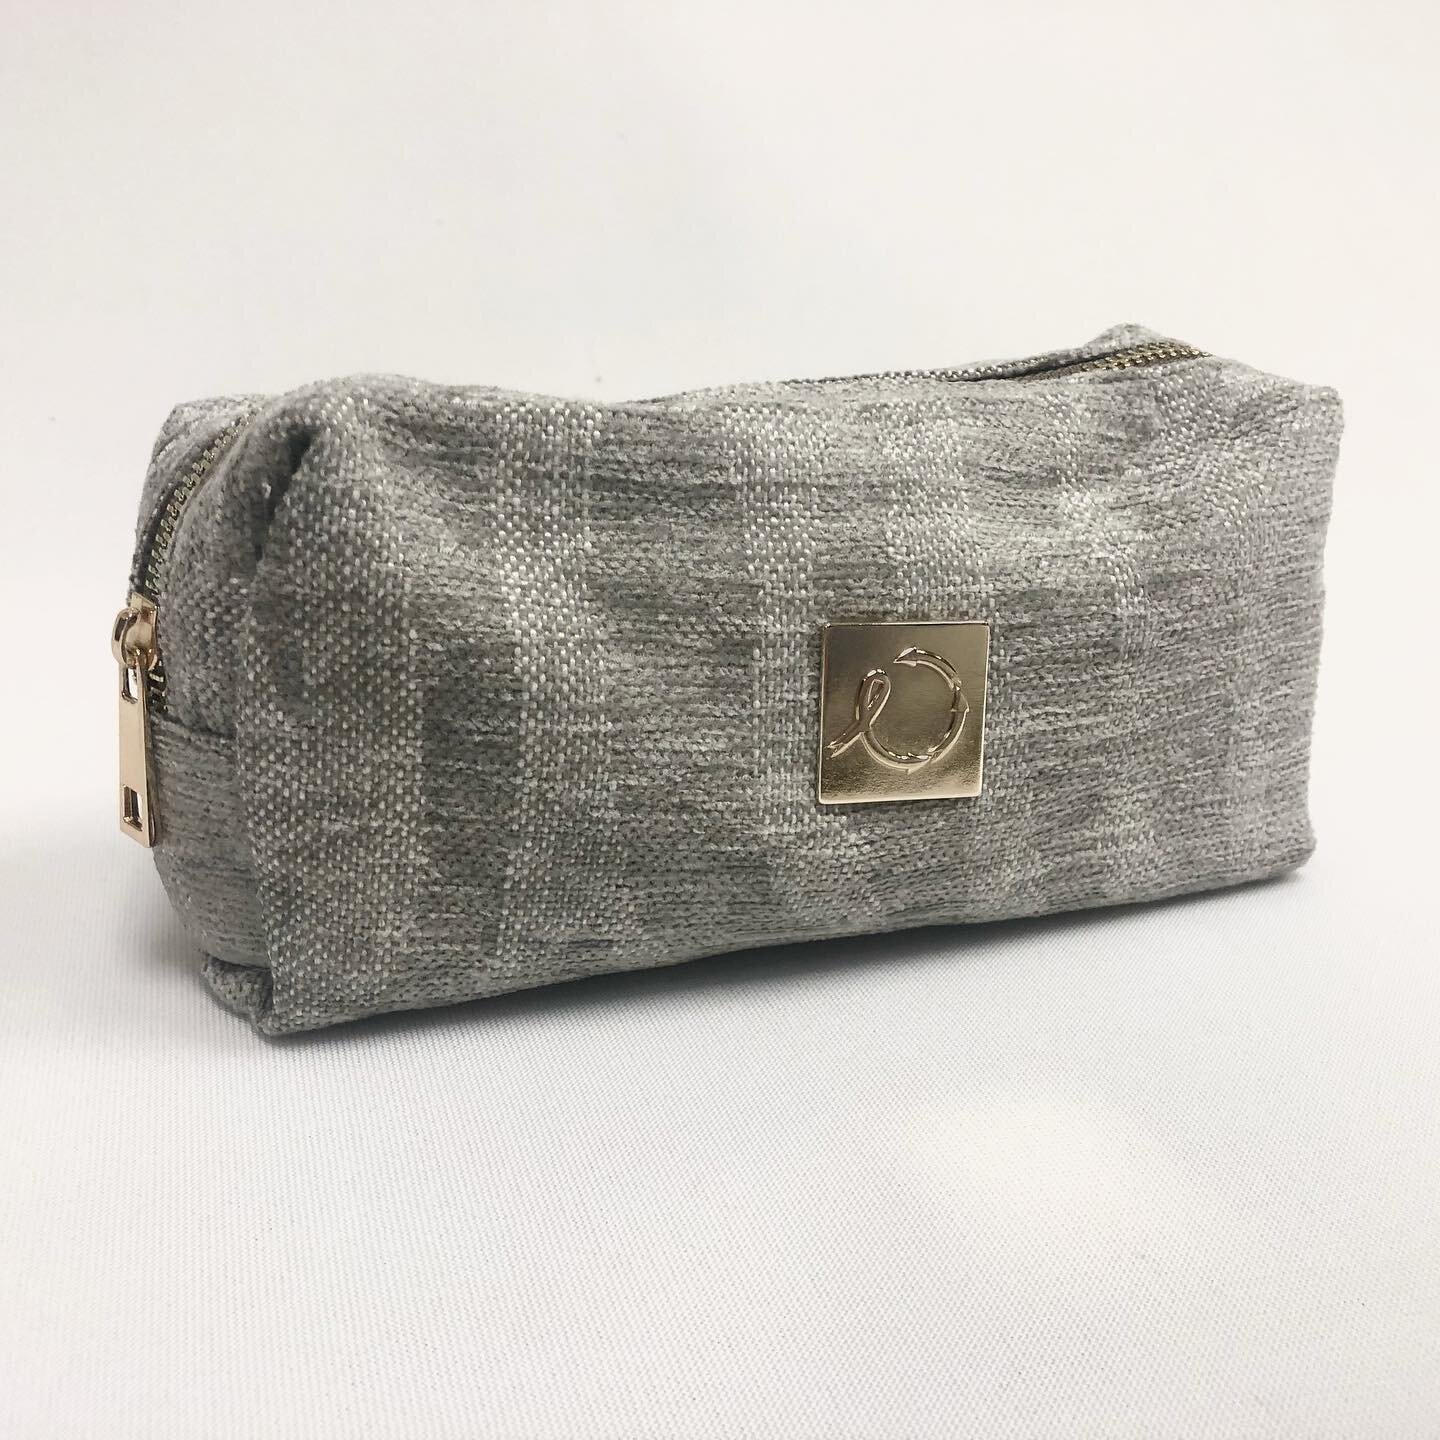 The Nadia is a great makeup bag, but also the perfect pencil pouch for school supplies! ✏️✂️ Check out our highlights to see where you can shop for a Nadia bag near you! ♻️💜 #makeupbag #pencilpouch #upcycledbag #upcycle #sustainablefashion #reducewa